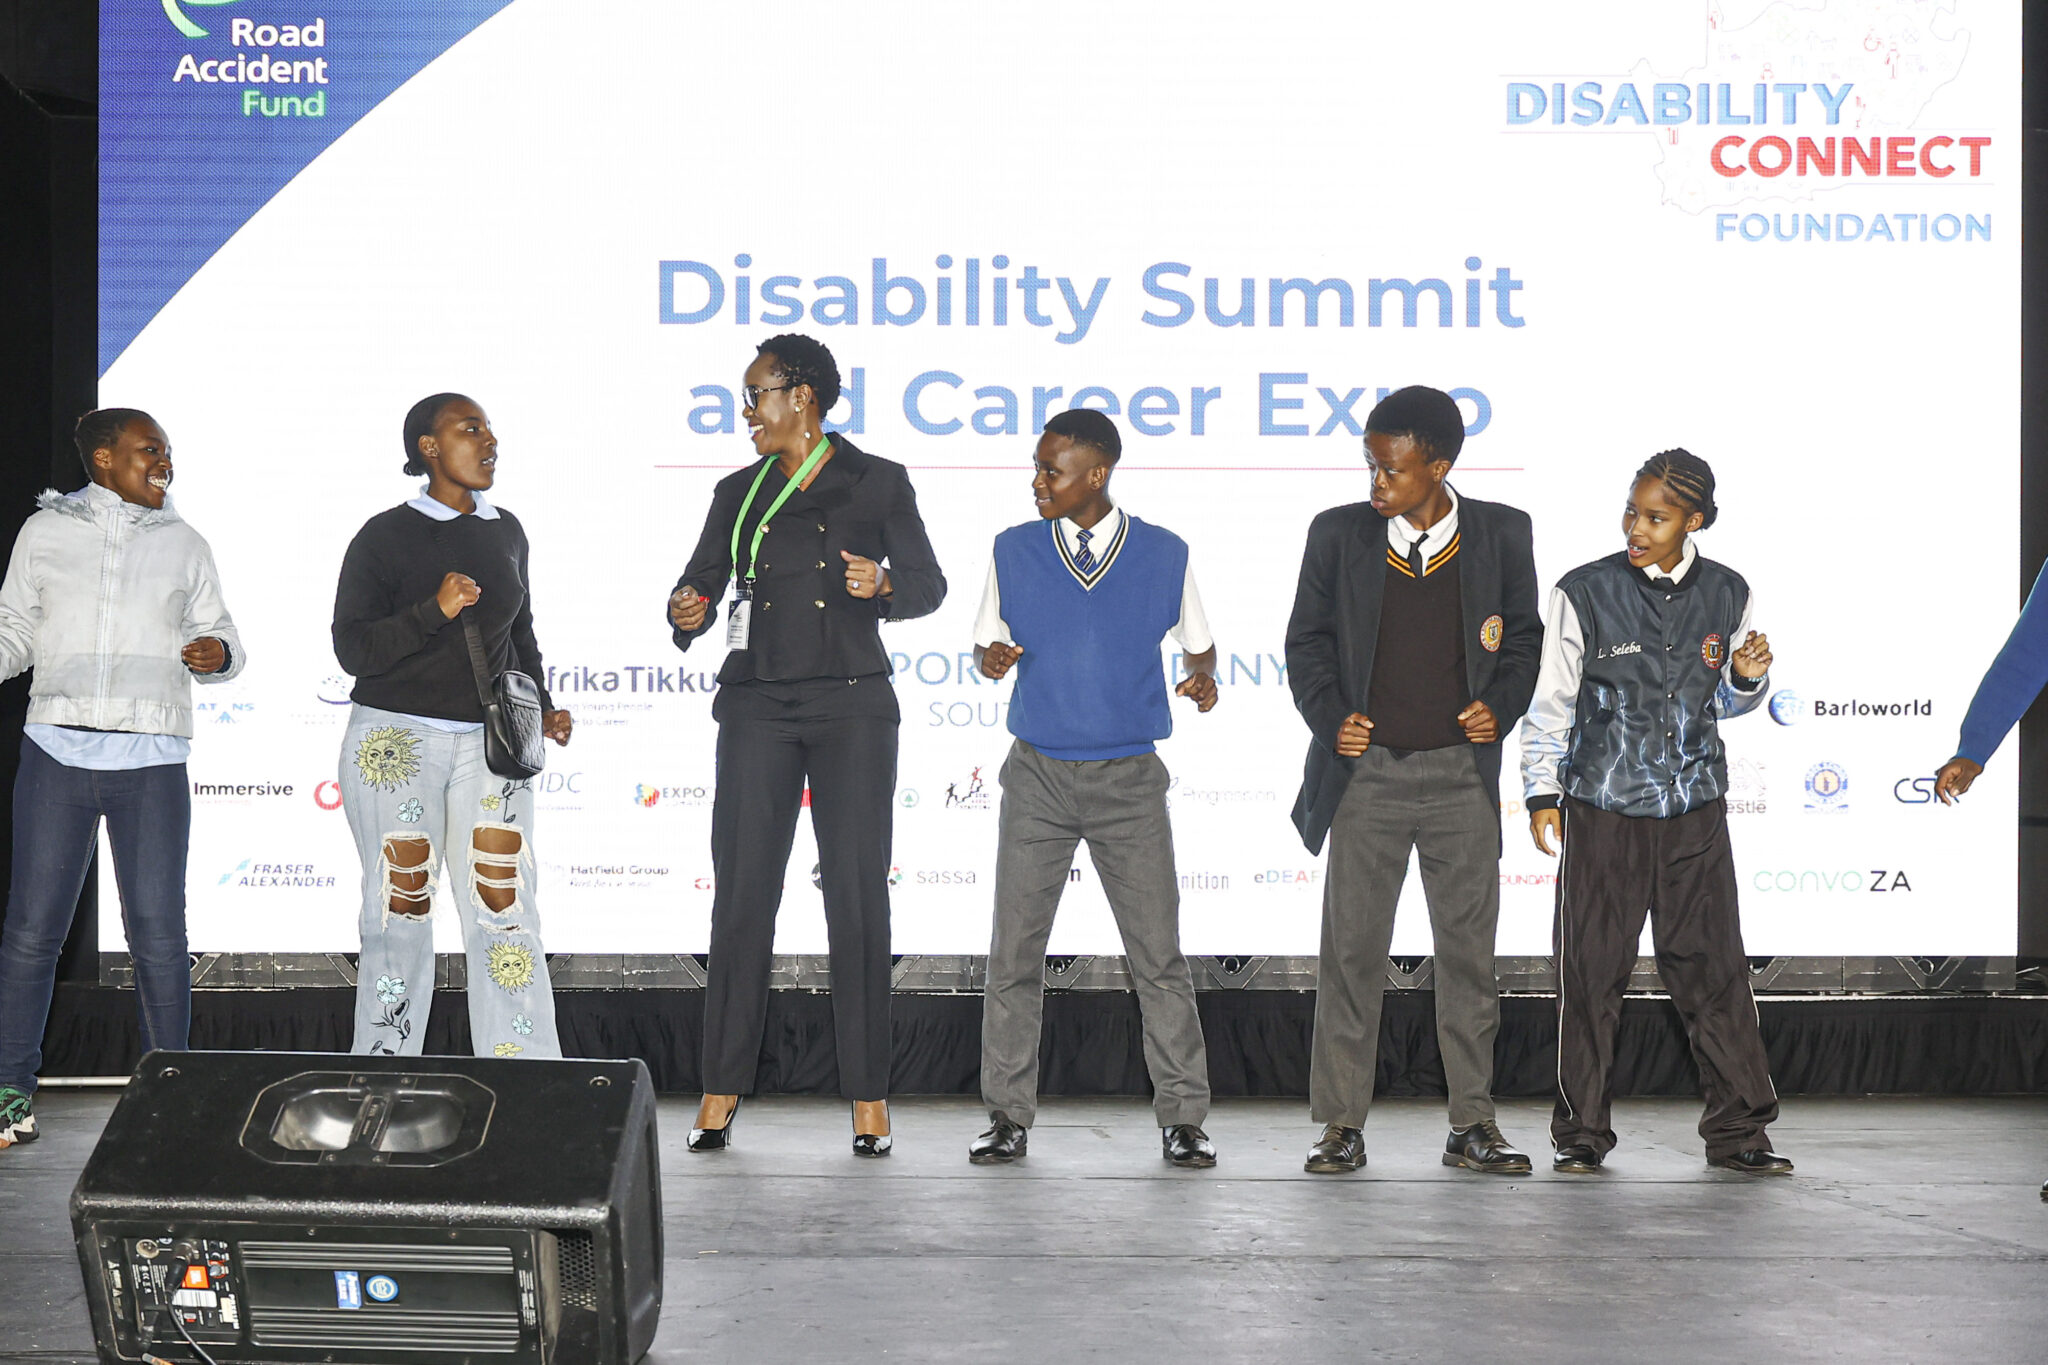 Promoting and enabling employment opportunities for people with disabilities